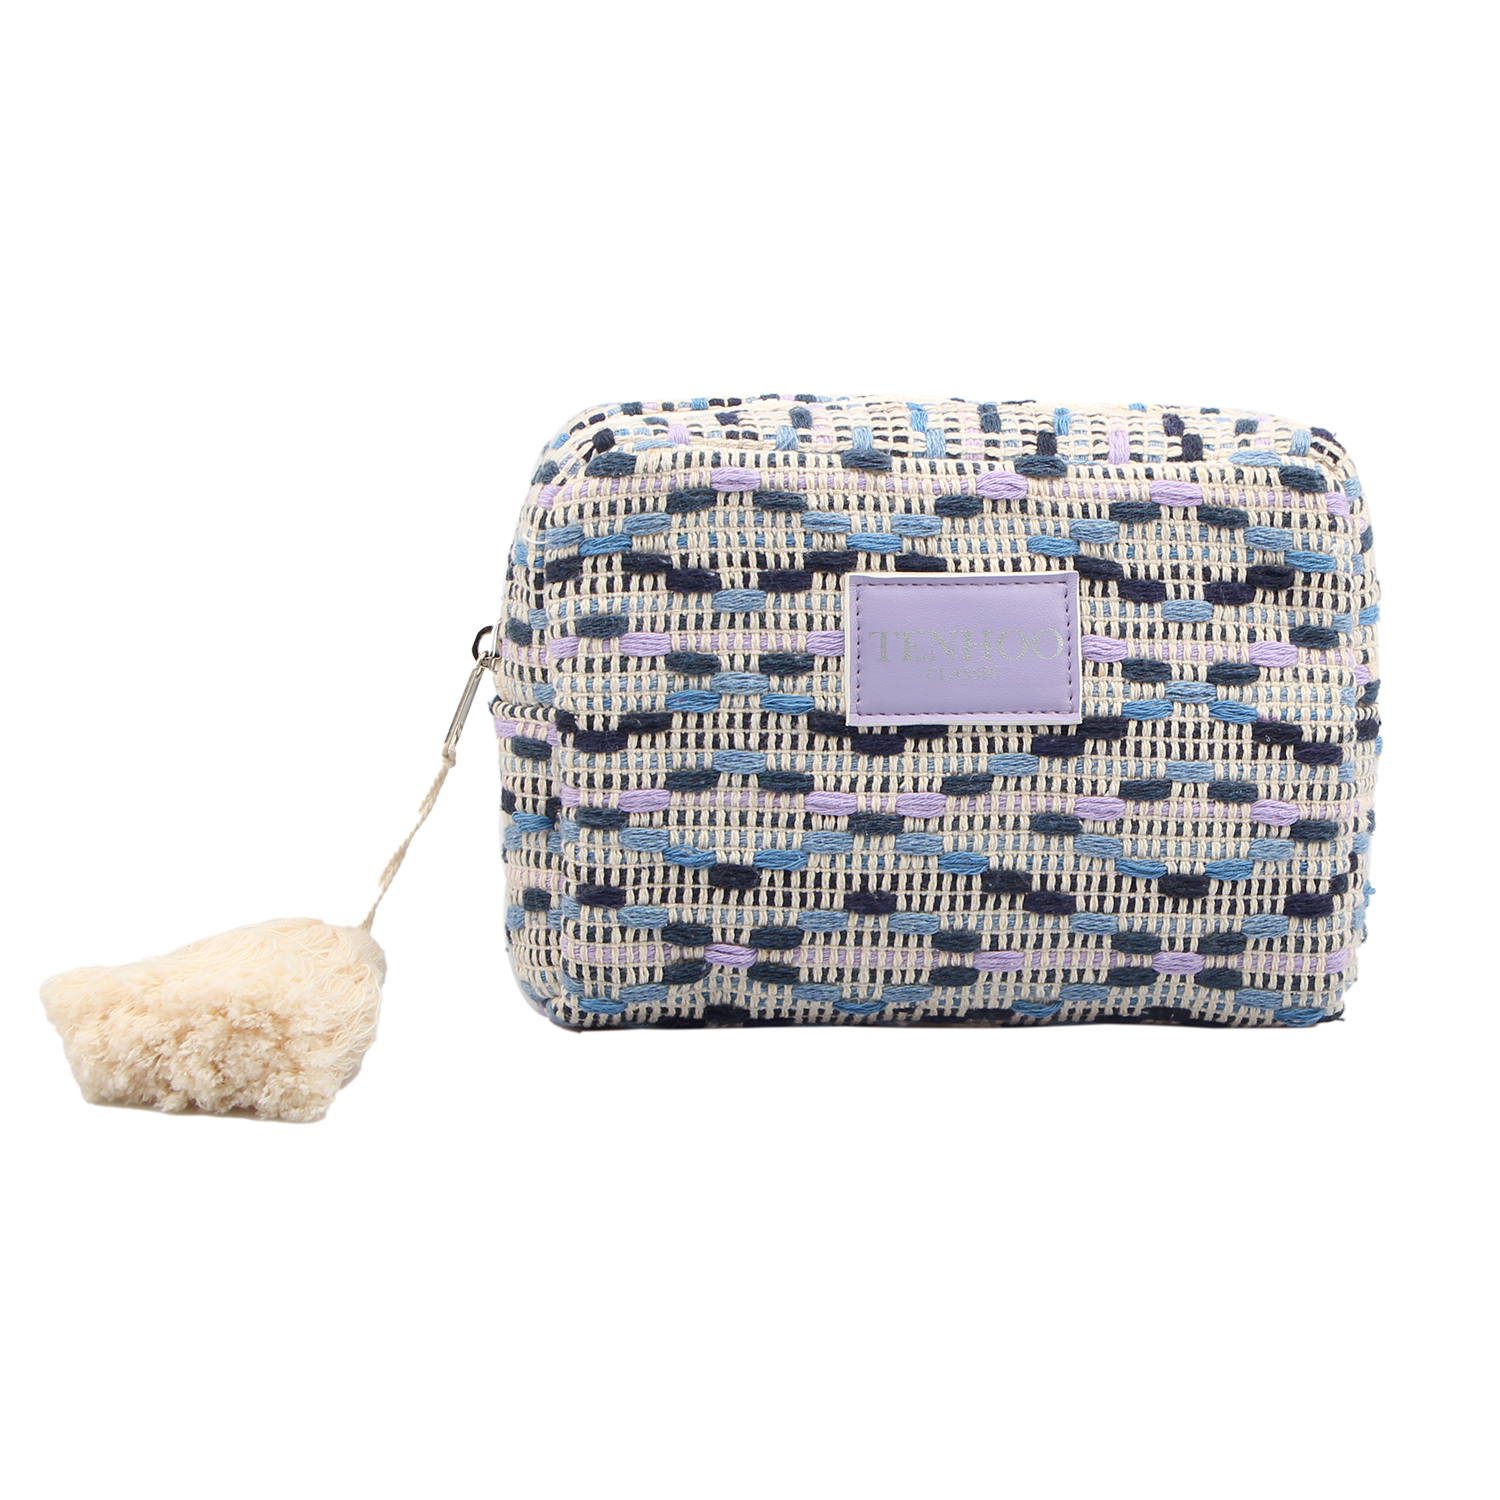 COSMETIC BAG,This Woven bag is suitable makeup organizer for you. It can meet your daily matching needs,you can match it according to your clothing or bag needs.A must for daily travel storage,used...